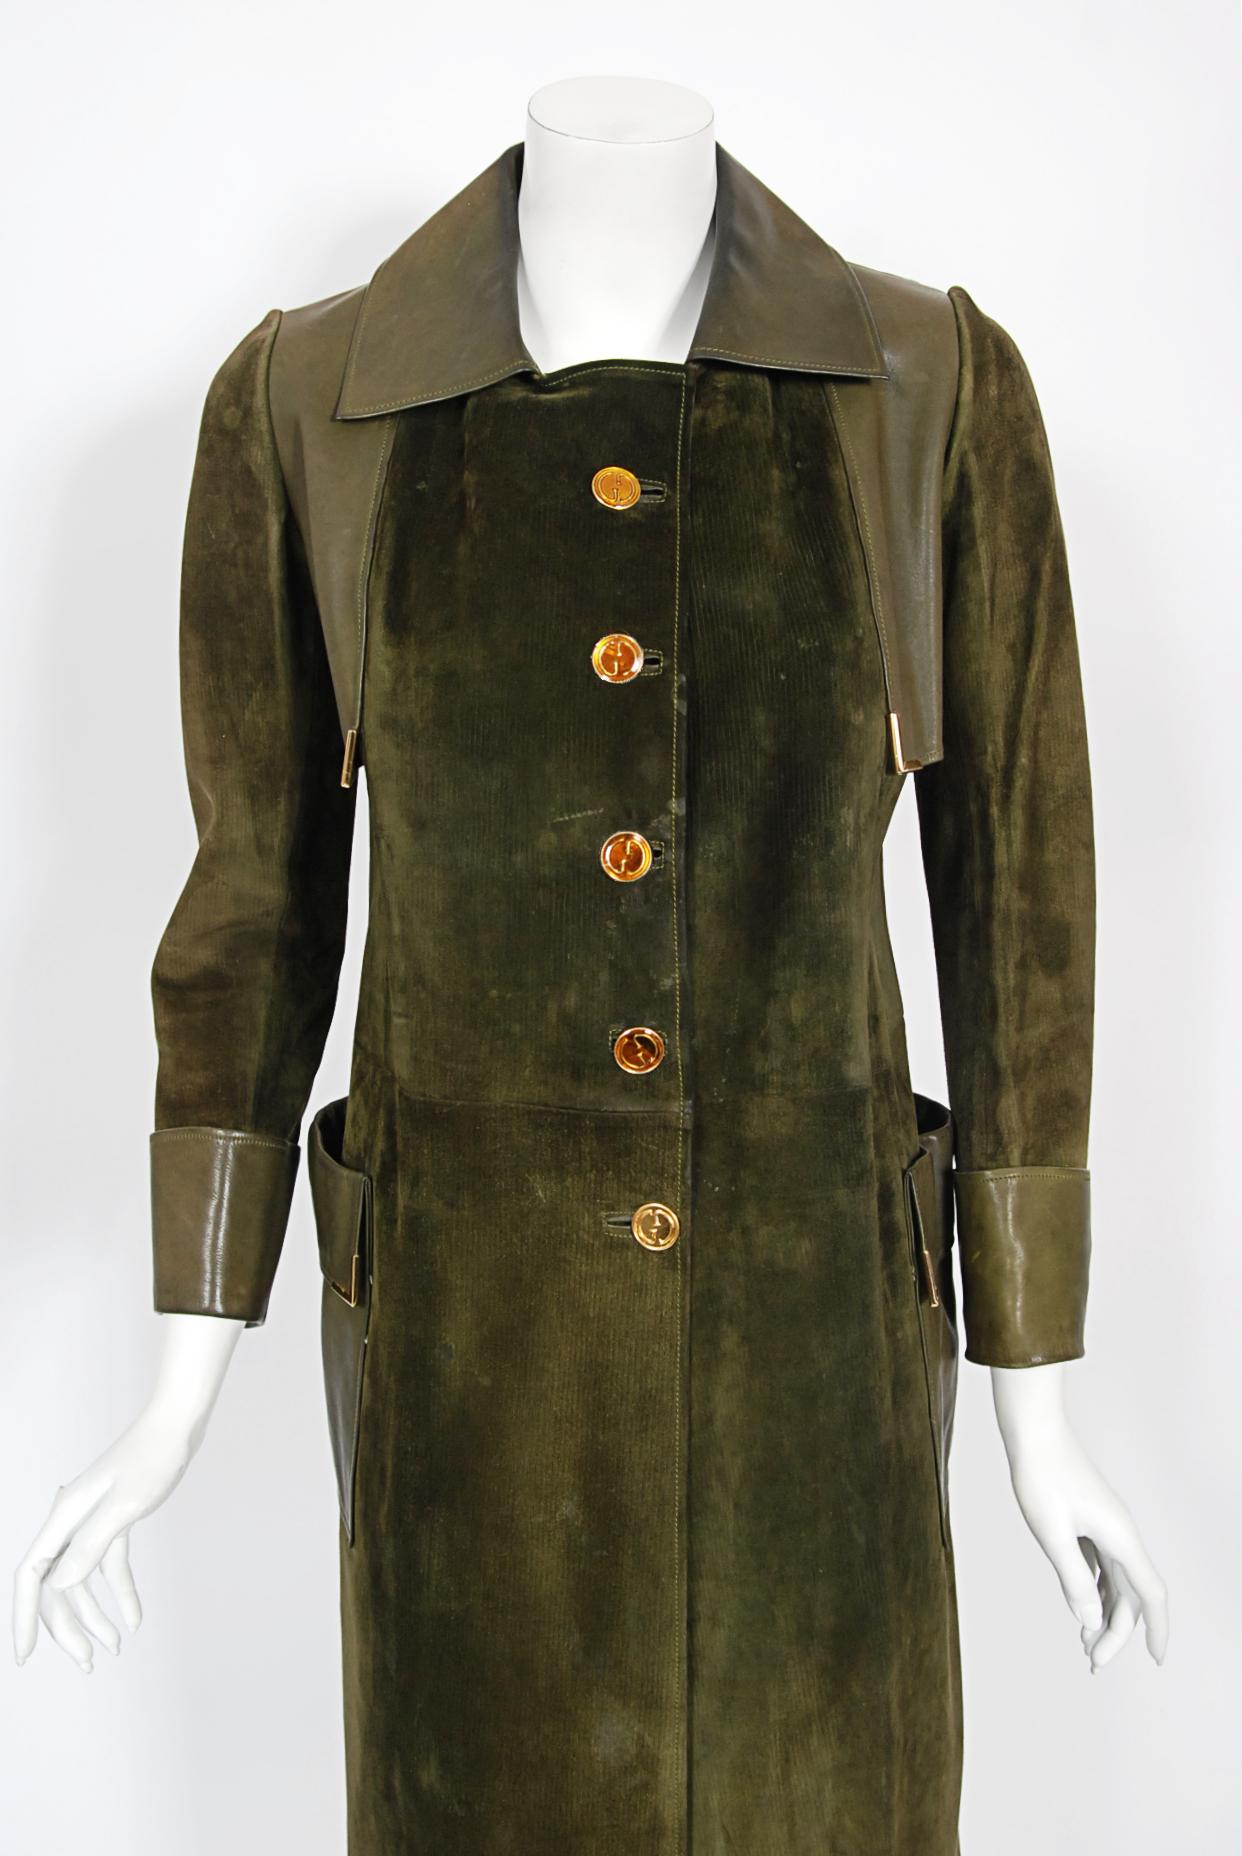 A spectacular early 1970's Gucci trench coat entirely crafted in the highest quality olive-green leather and suede. This color is sensational! Earlier Gucci garments are very hard to come by and this garment is a statement piece. The jacket is